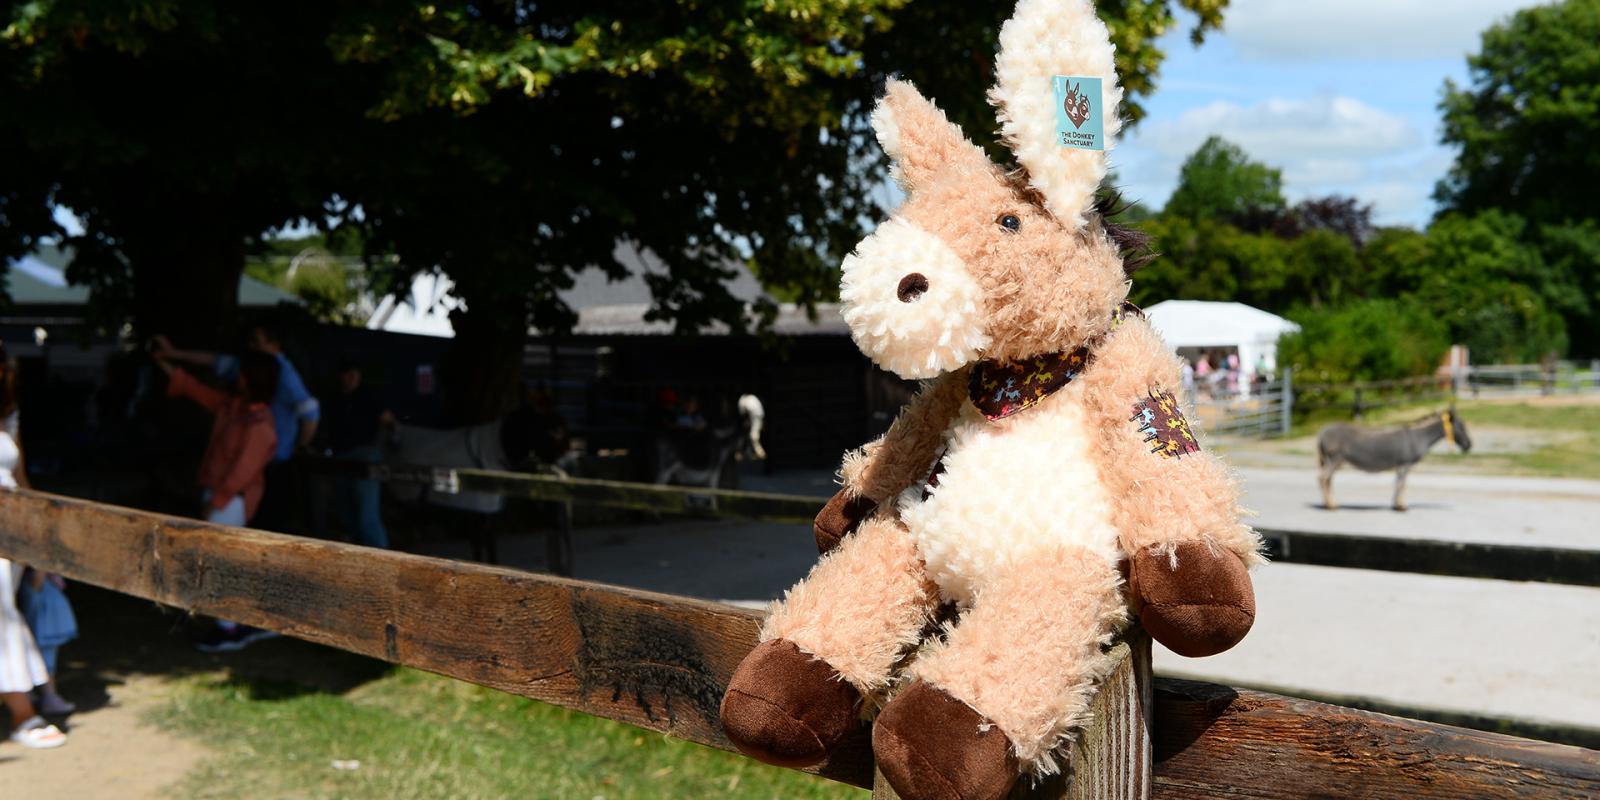 Patch the donkey toy at The Teddy Bears Picnic